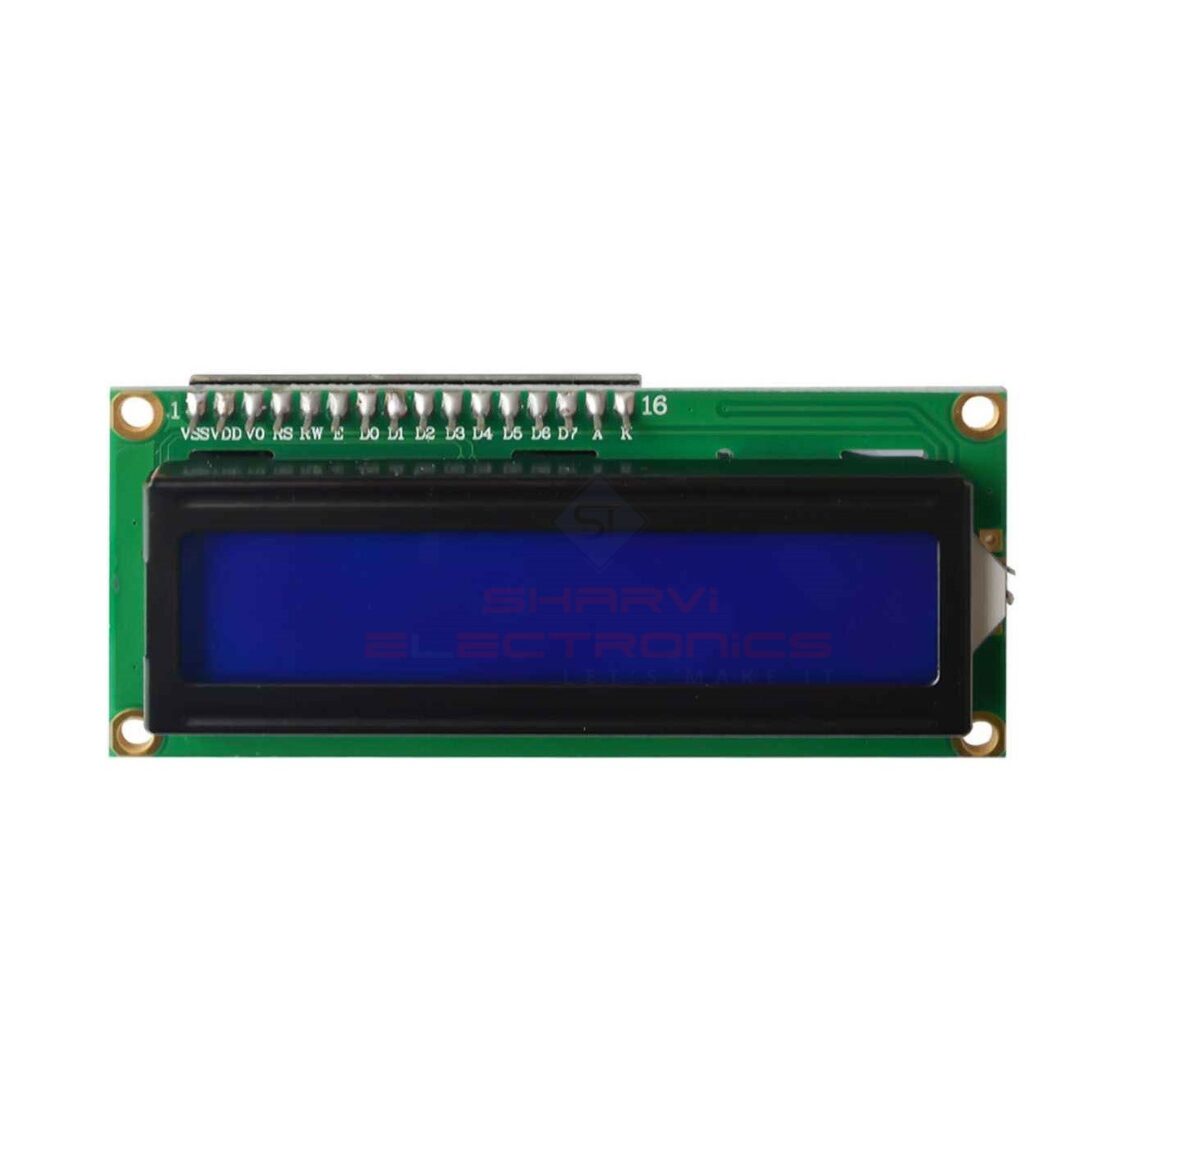 16×2 LCD Display Blue Backlight with I2C-IIC interface sharvielectronics